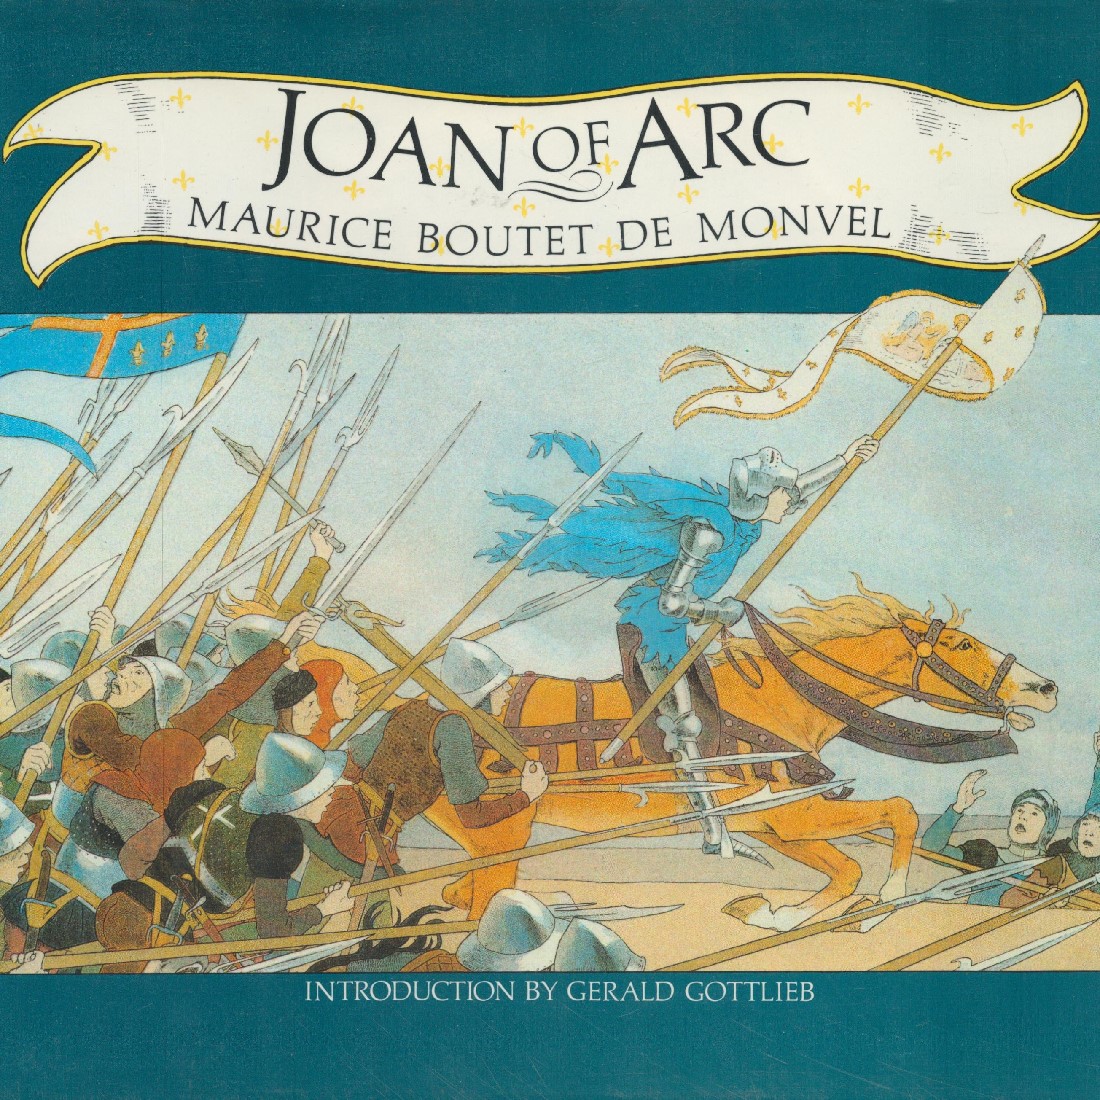 Joan of Arc by Maurice Boutet de Monvel 1981 Hardback Book First UK Edition with 55 pages